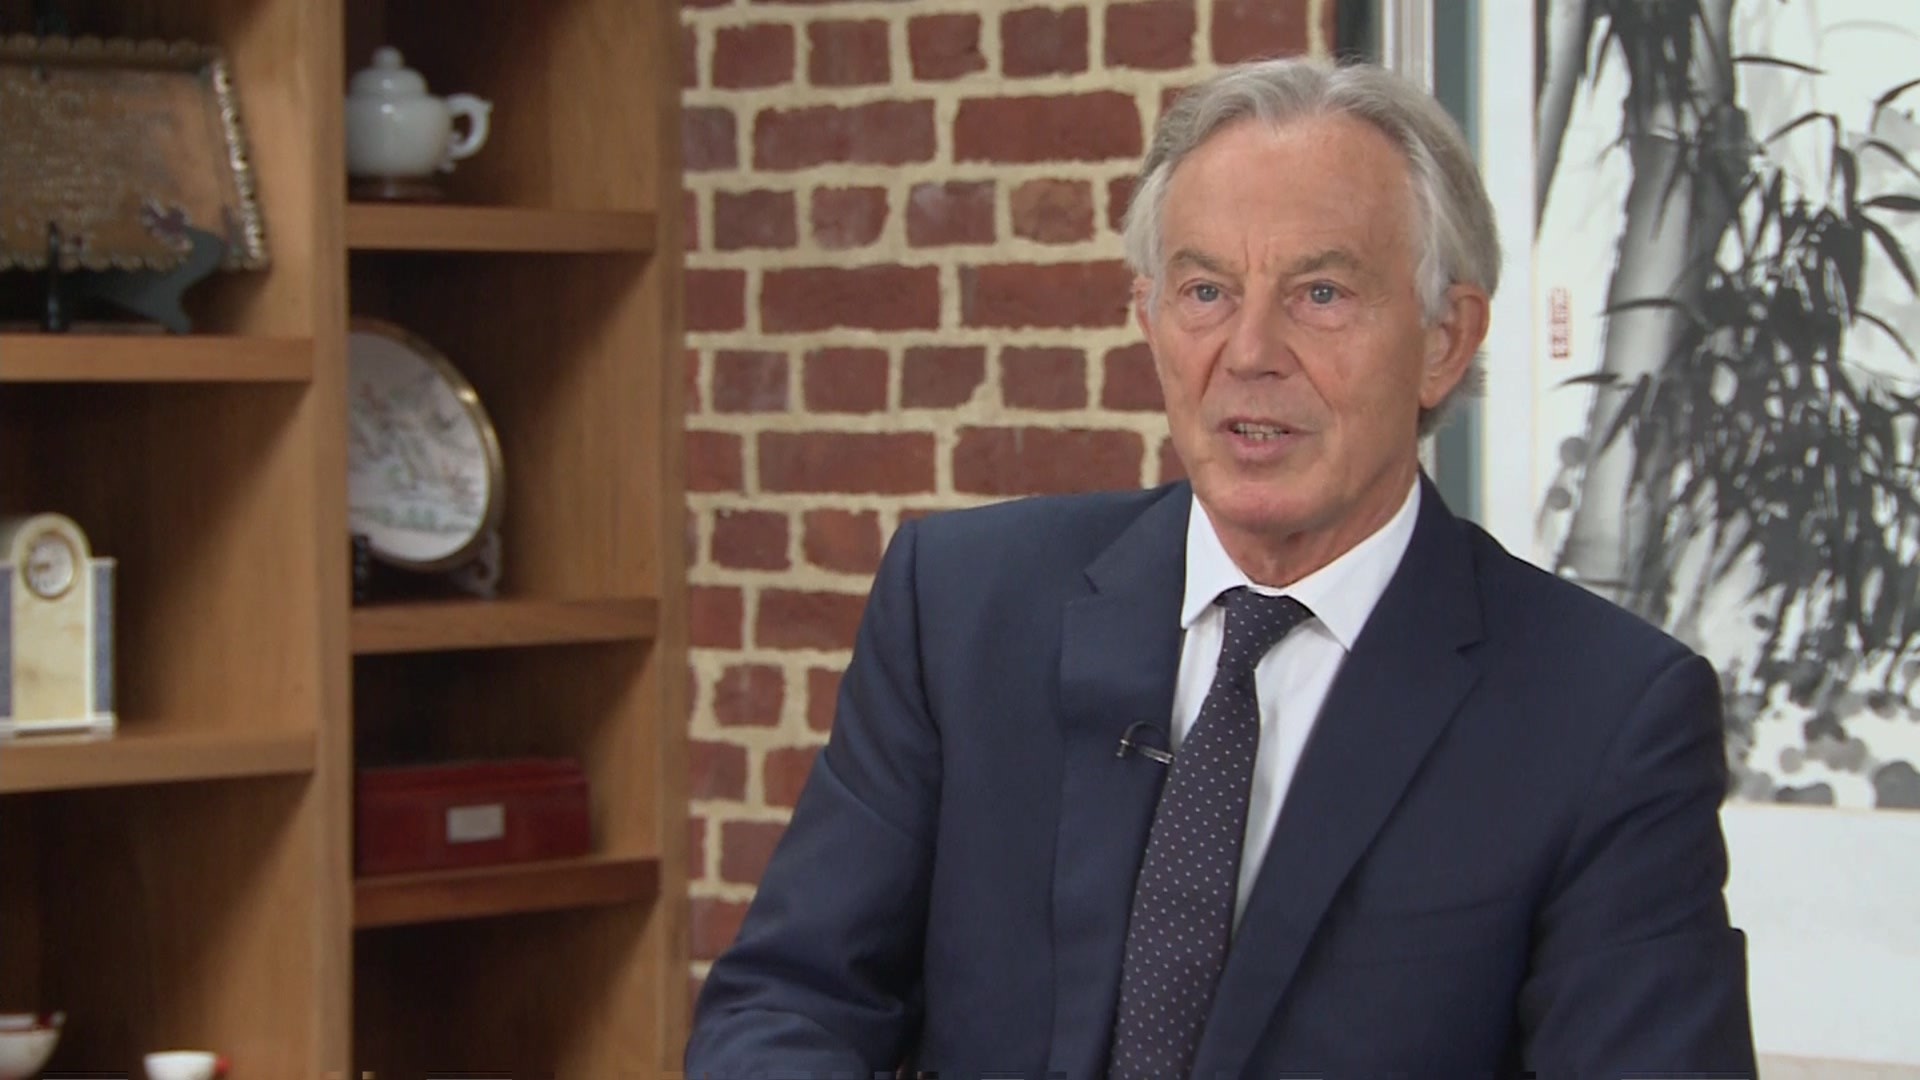 Blair: The sacrifices in Afghanistan were not in vain